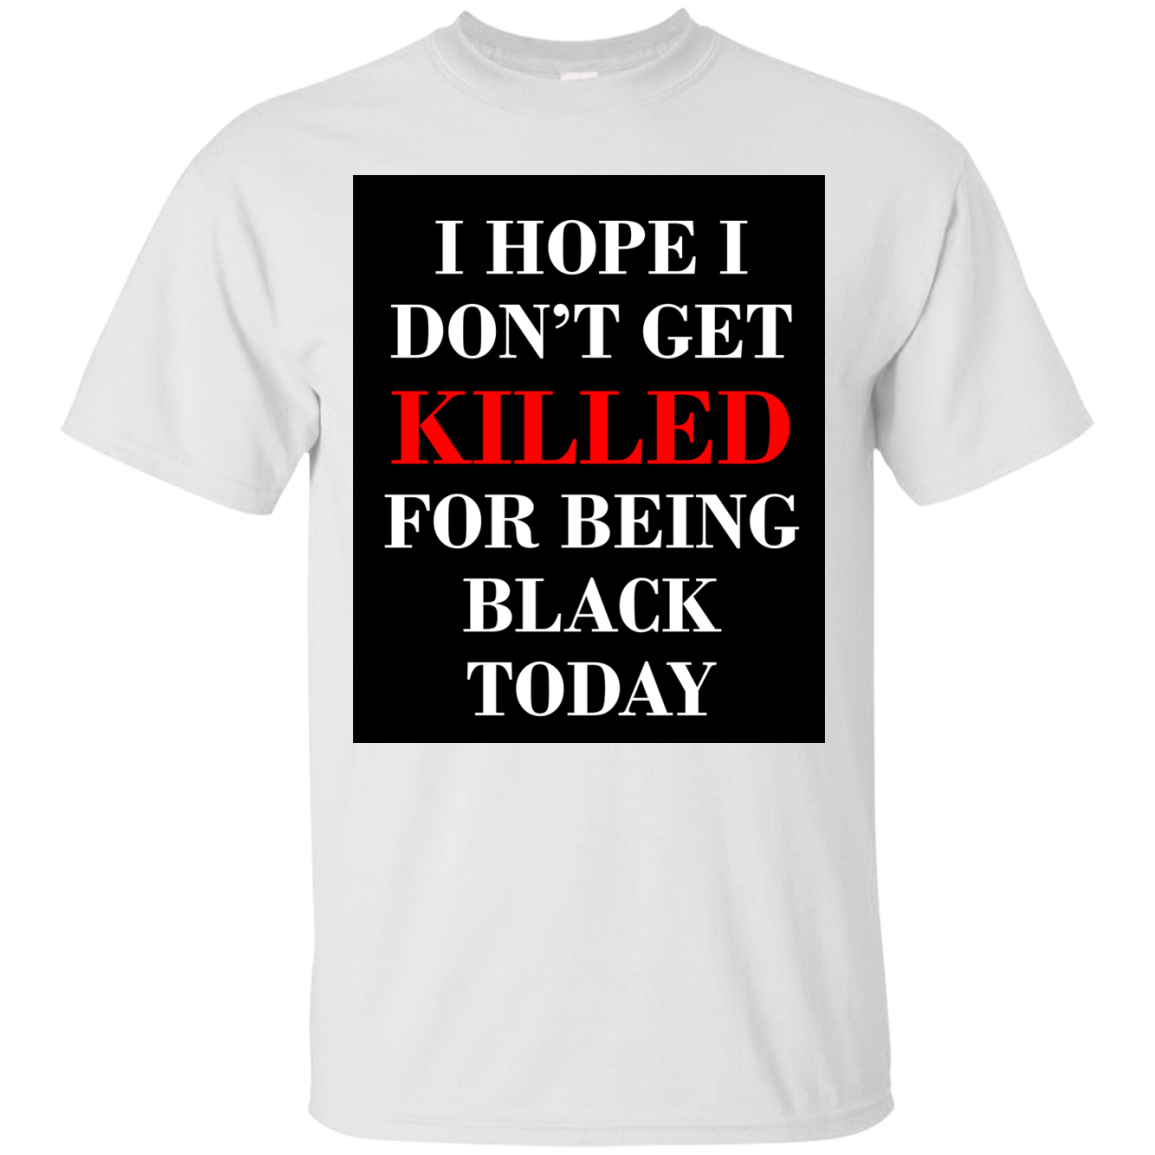 I hope I don't get killed for being black today shirt, tank